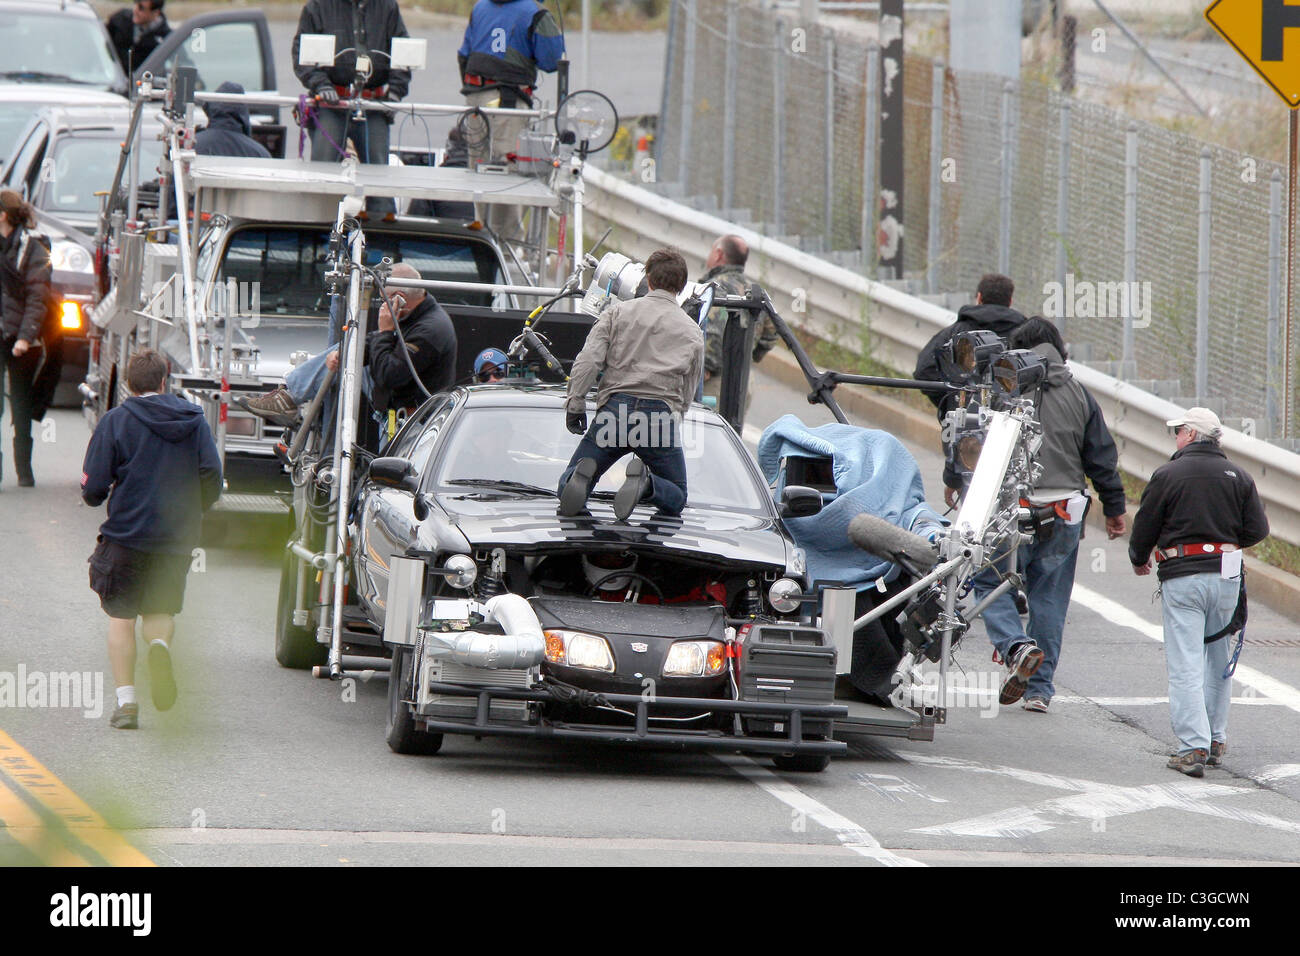 Tom Cruise filming a stunt scene on top of a car while on the set of his  new movie 'Wichita' Boston, Massachusetts - 30.09.09 Stock Photo - Alamy